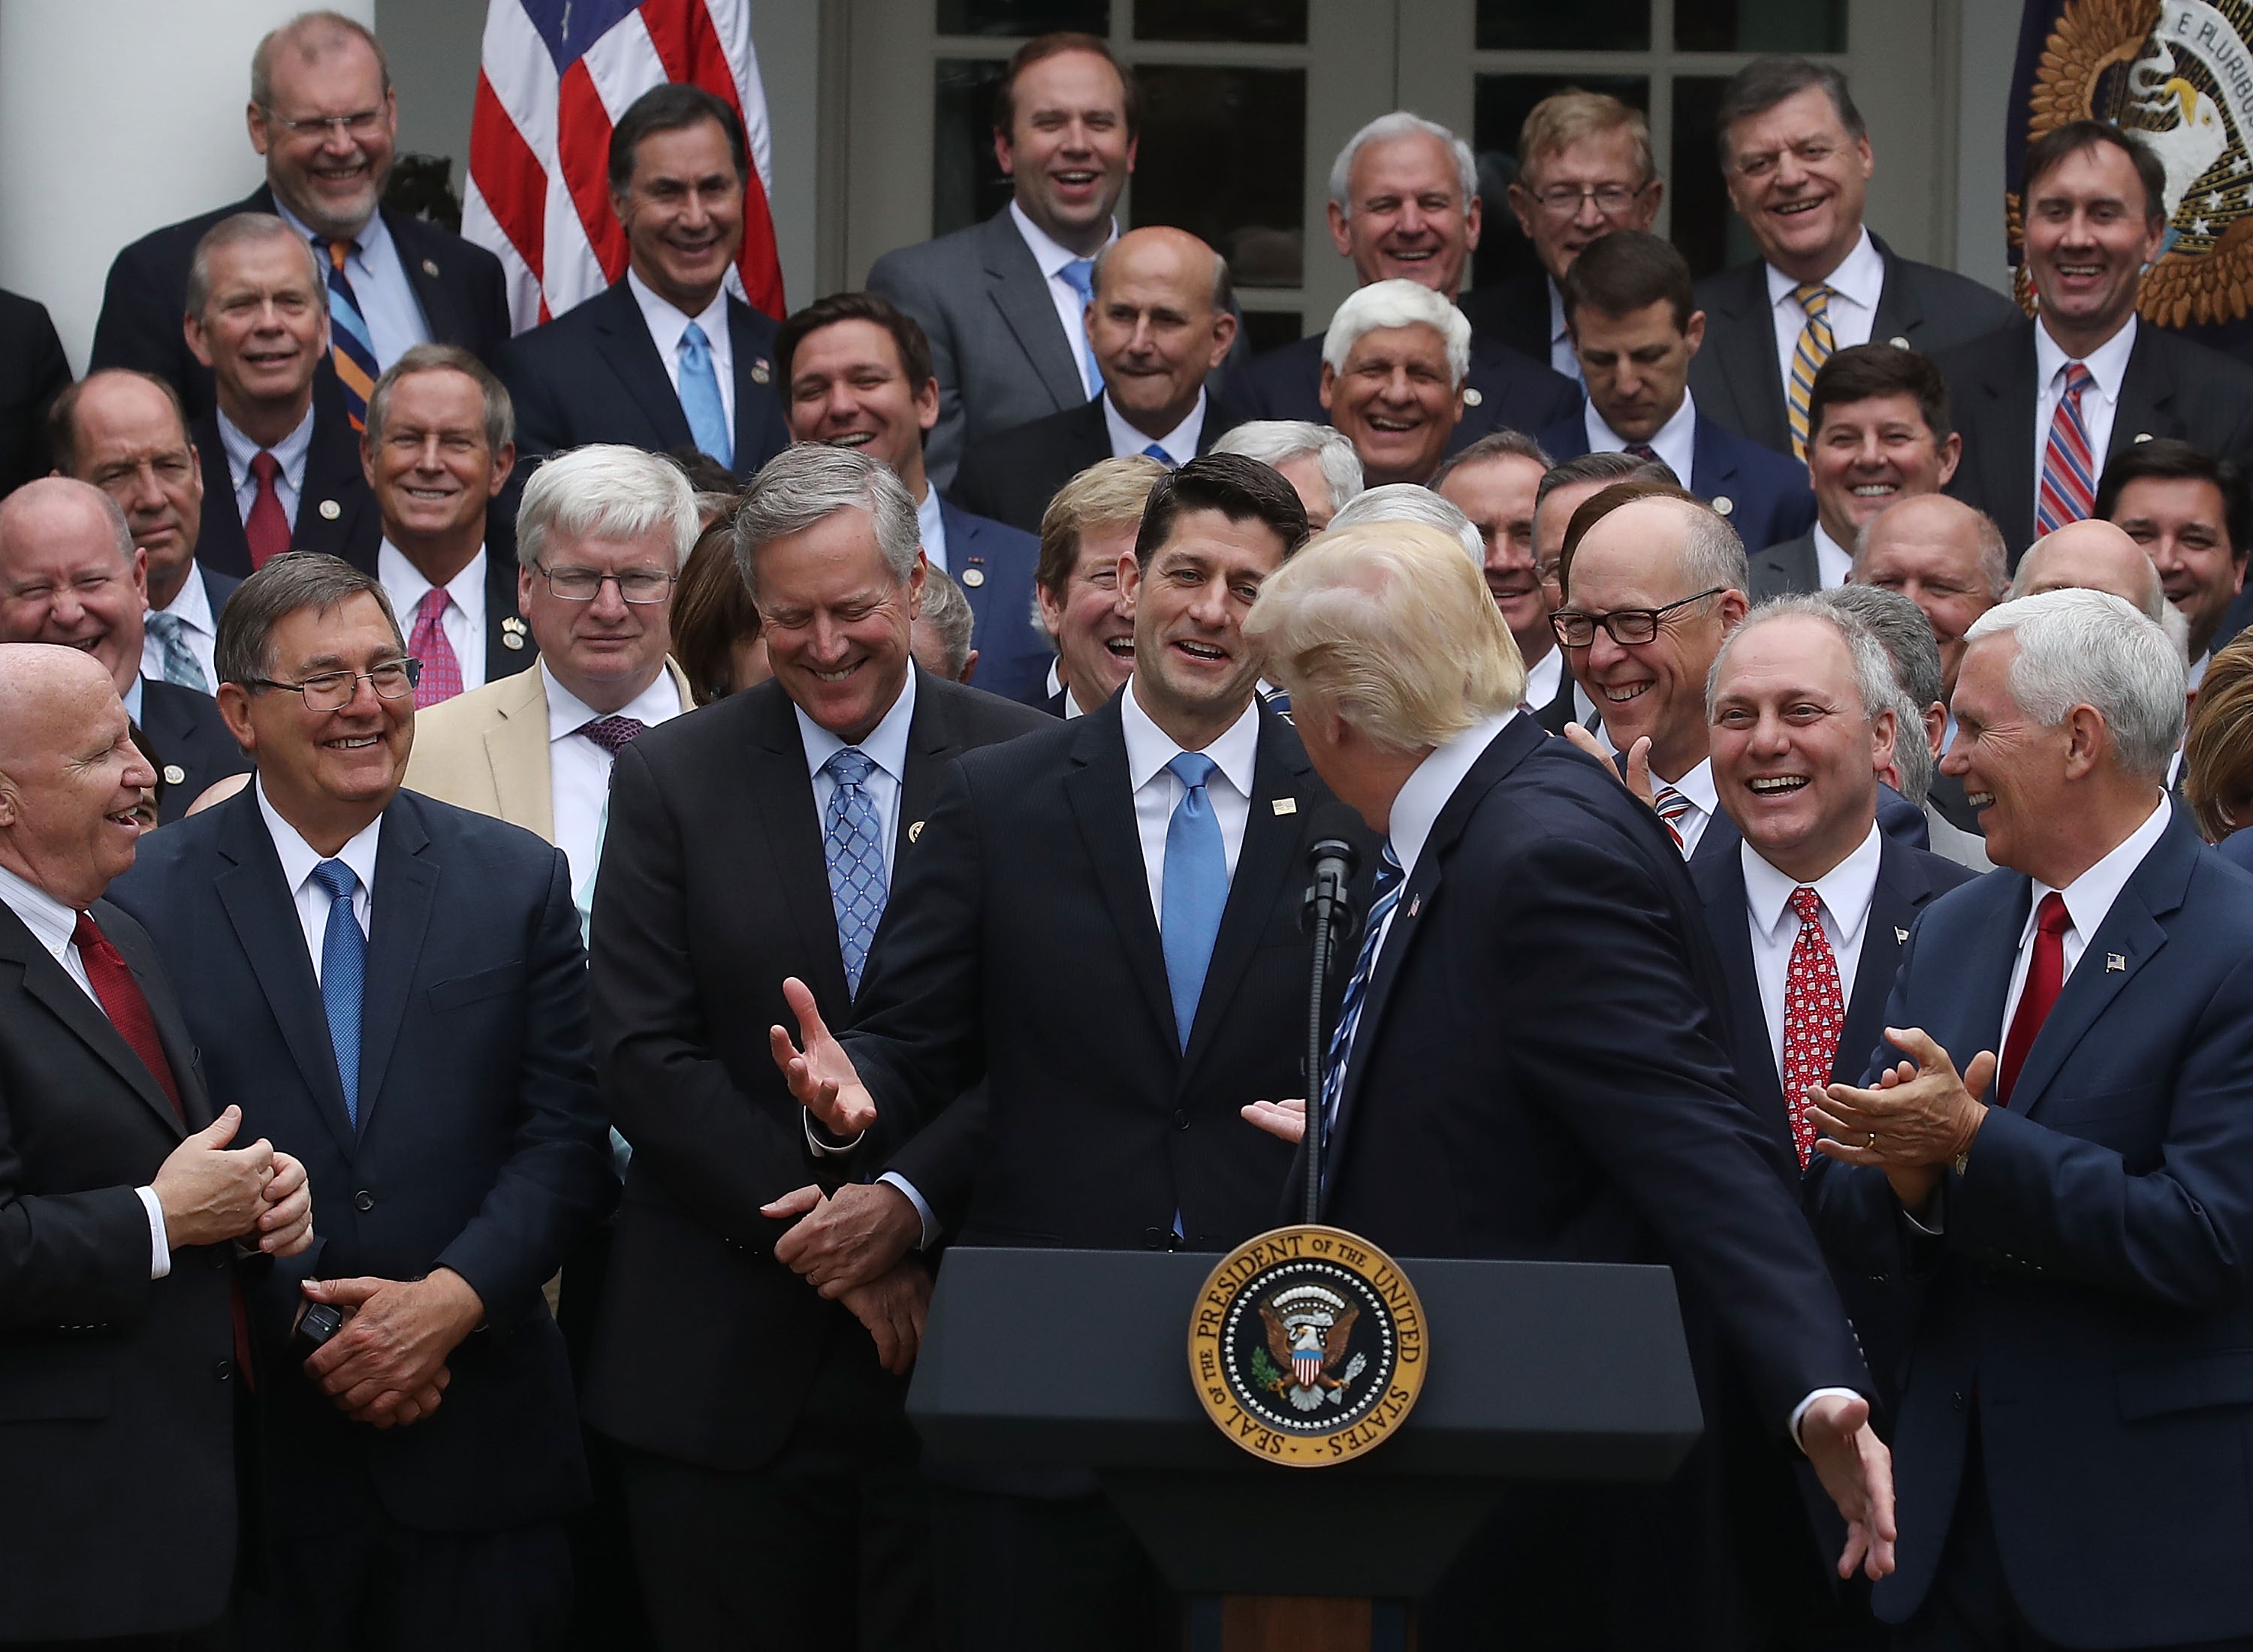 President Trump and House Republicans celebrate passing ObamaCare replacement legislation.